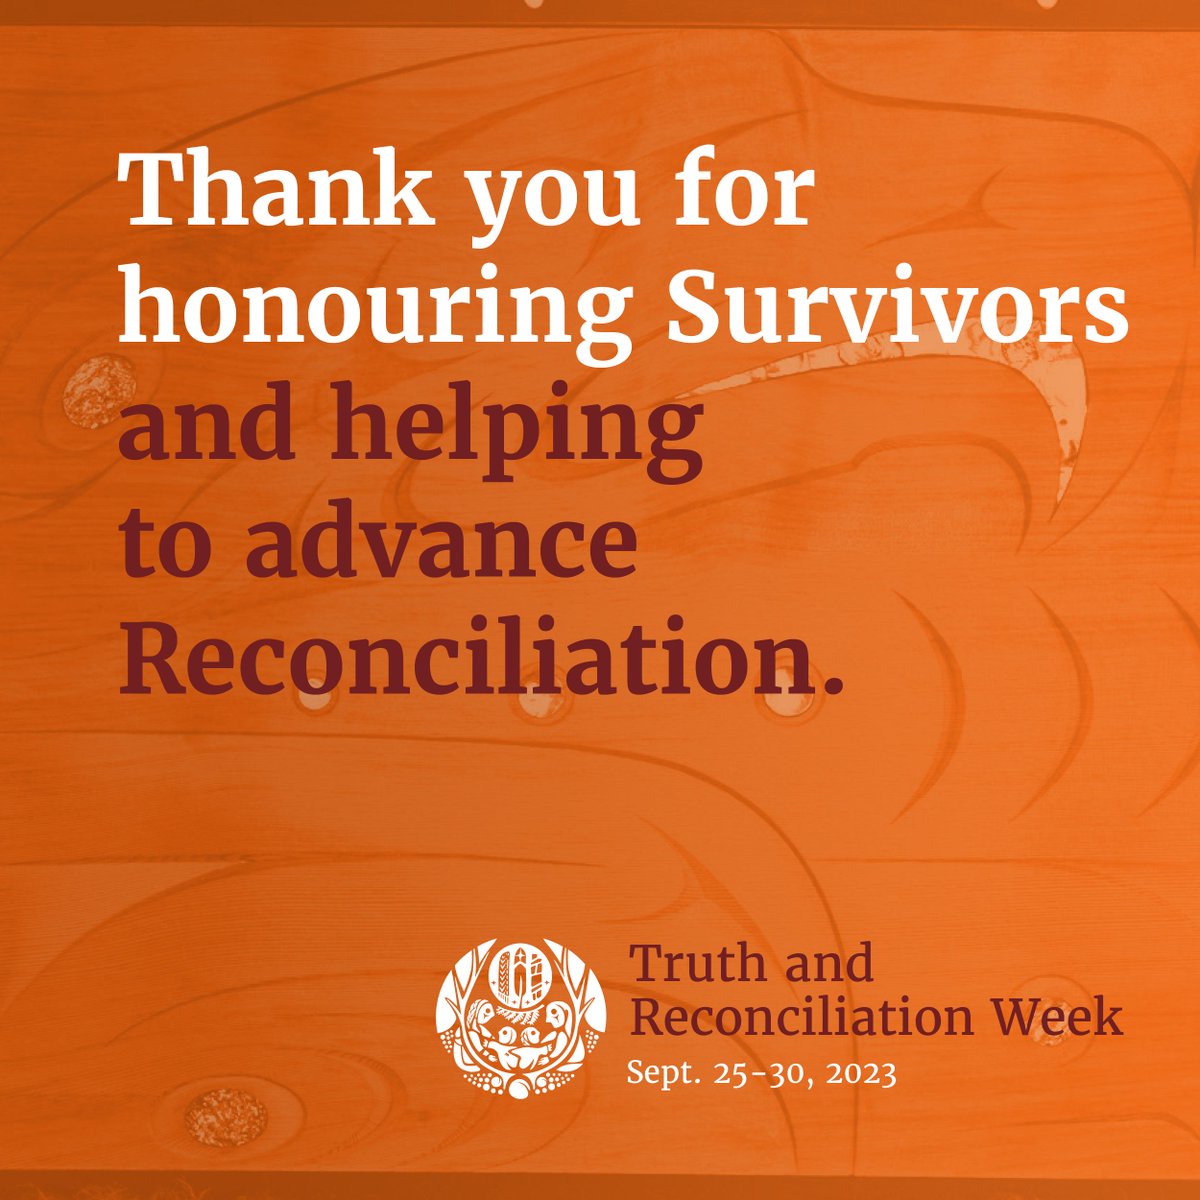 #TruthAndReconciliation Week 2023 wouldn't have been possible without our generous sponsors. We thank them and the thousands that united to honor #ResidentialSchoolSurvivors & help advance #Reconciliation. Gratitude to the Survivors who shared their truths. #orangeshirtday